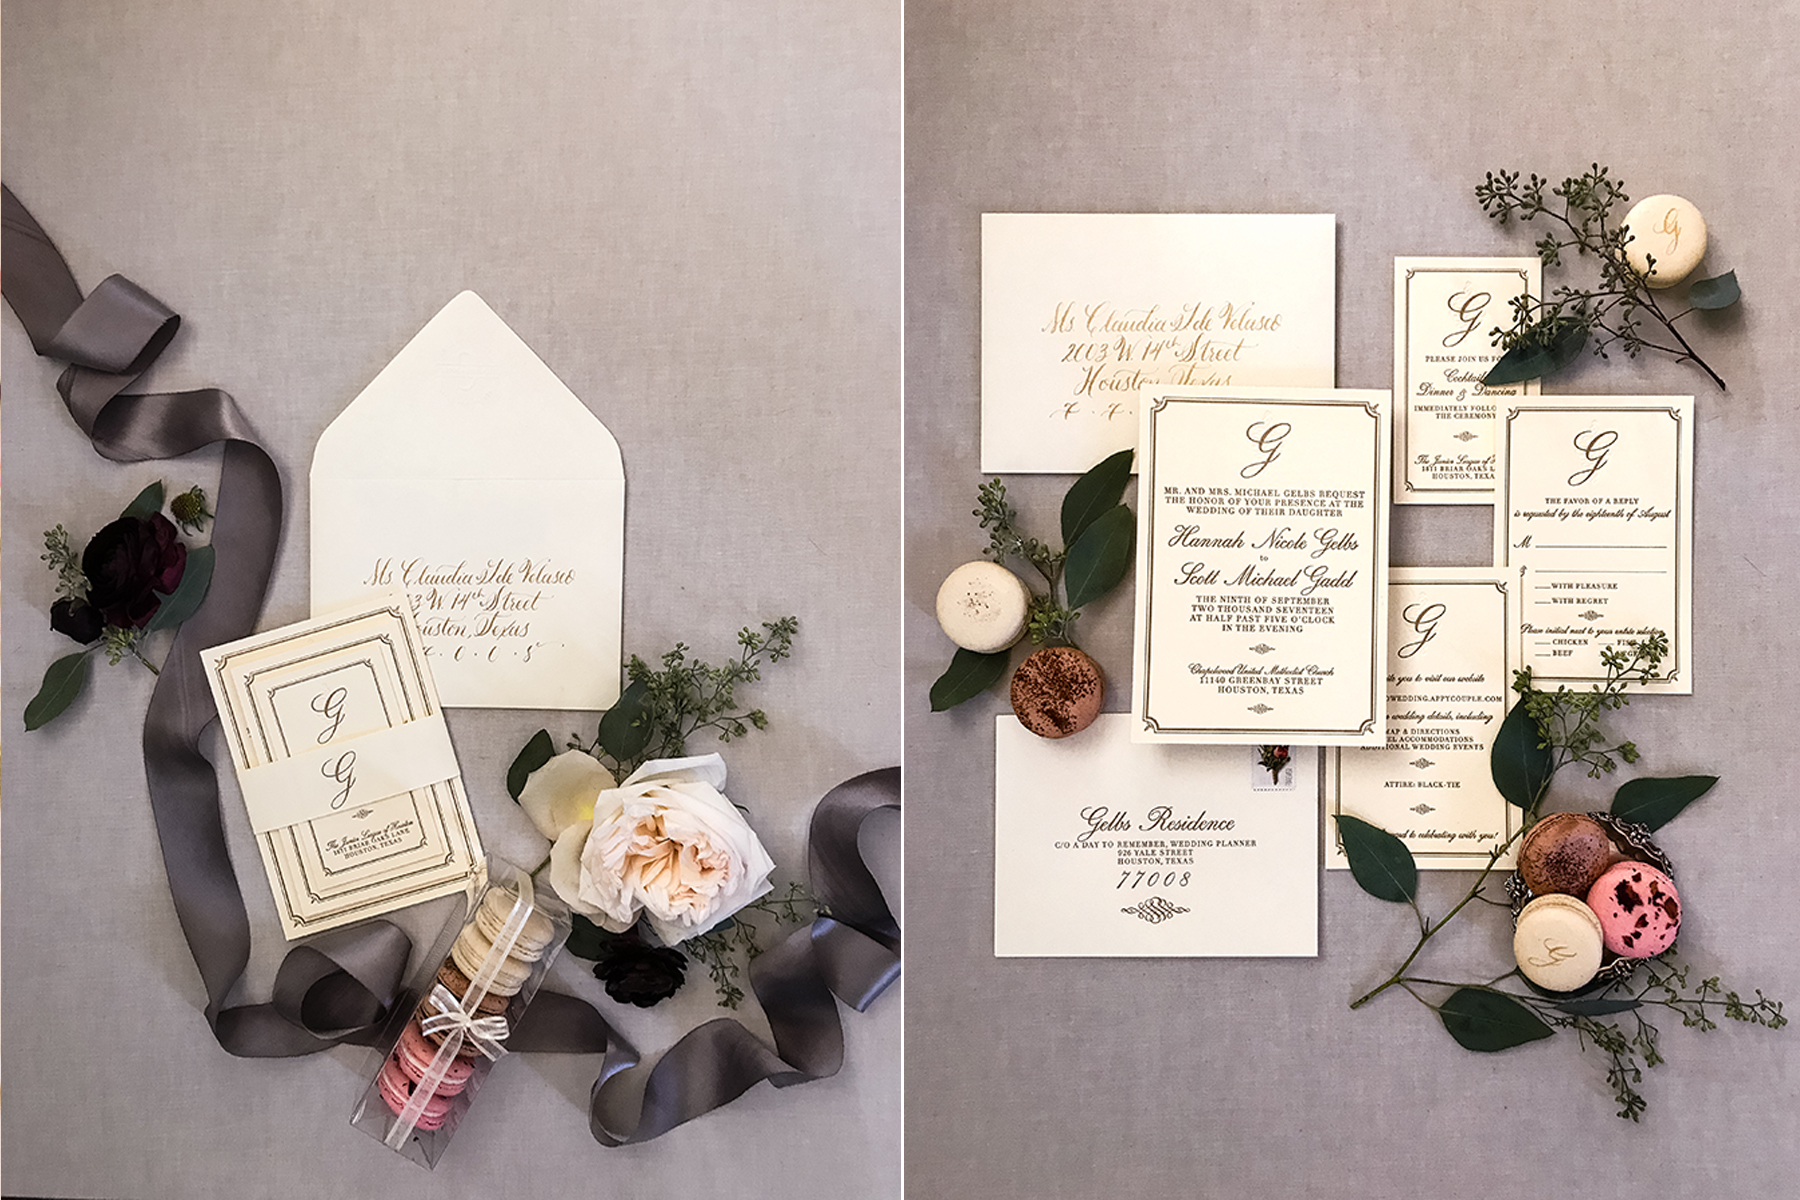  daytoremember.net | Koby Brown Photography | Wedding Stationery | A Day To Remember Houston Wedding Planning and Design 